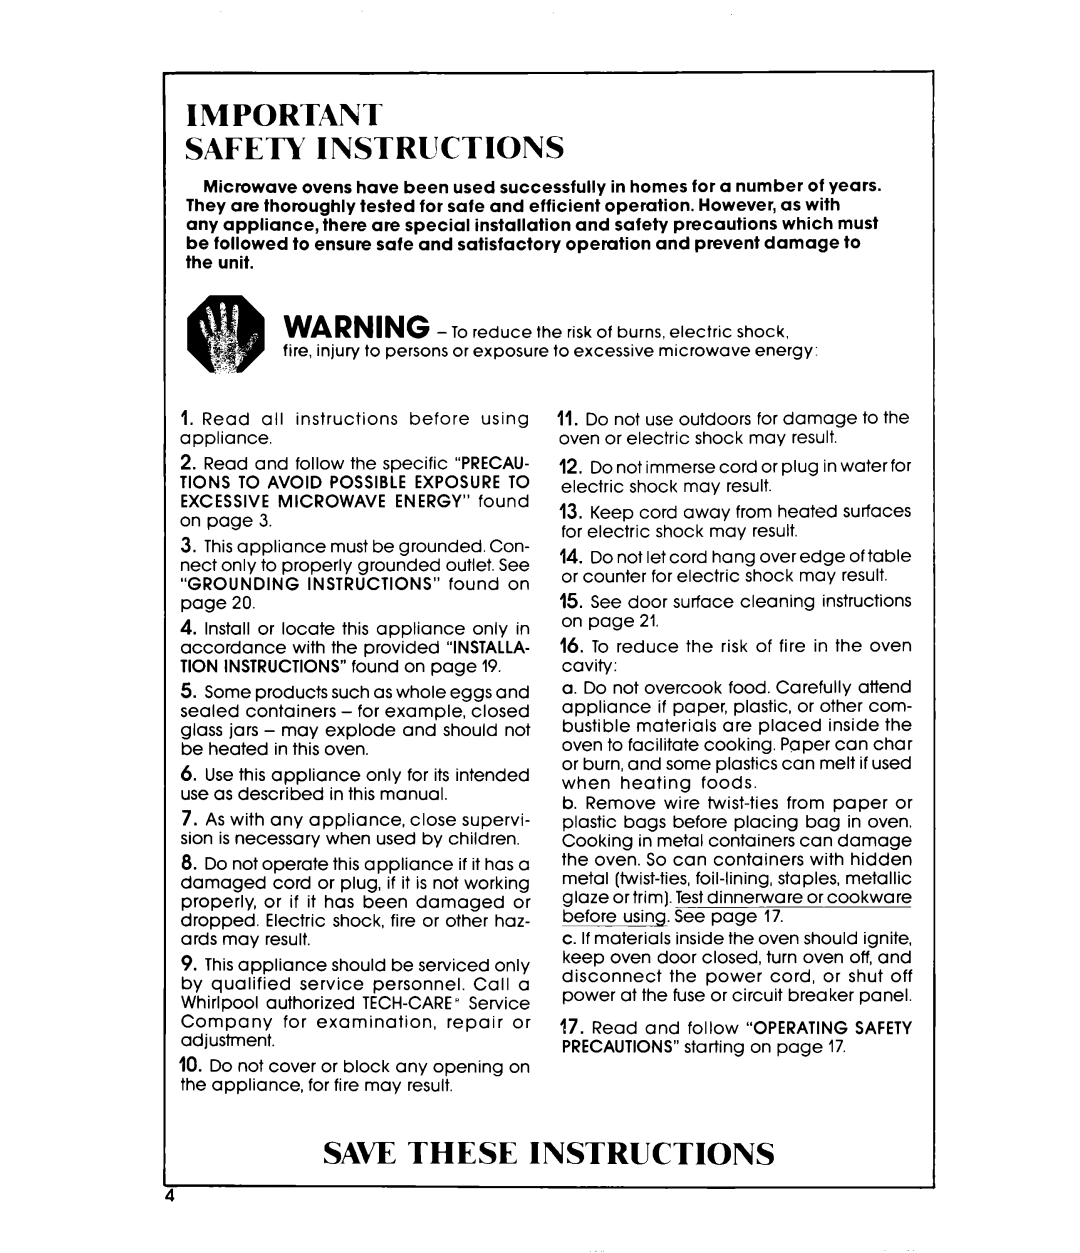 Whirlpool MW8520XP manual Safety Instructions, Save These Instructions 